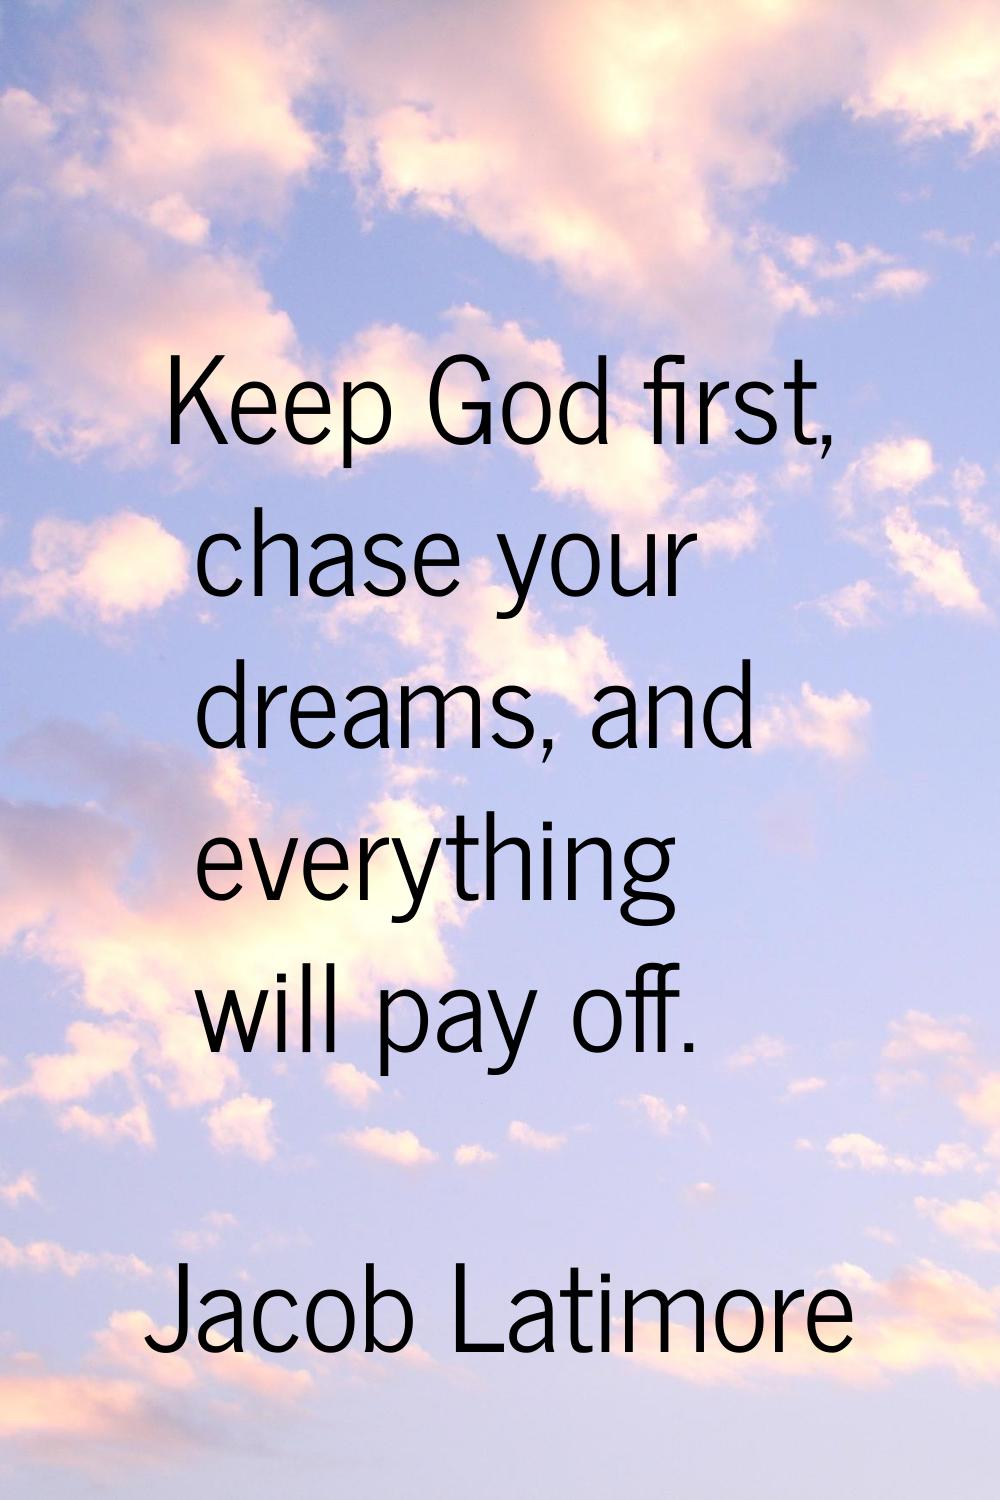 Keep God first, chase your dreams, and everything will pay off.